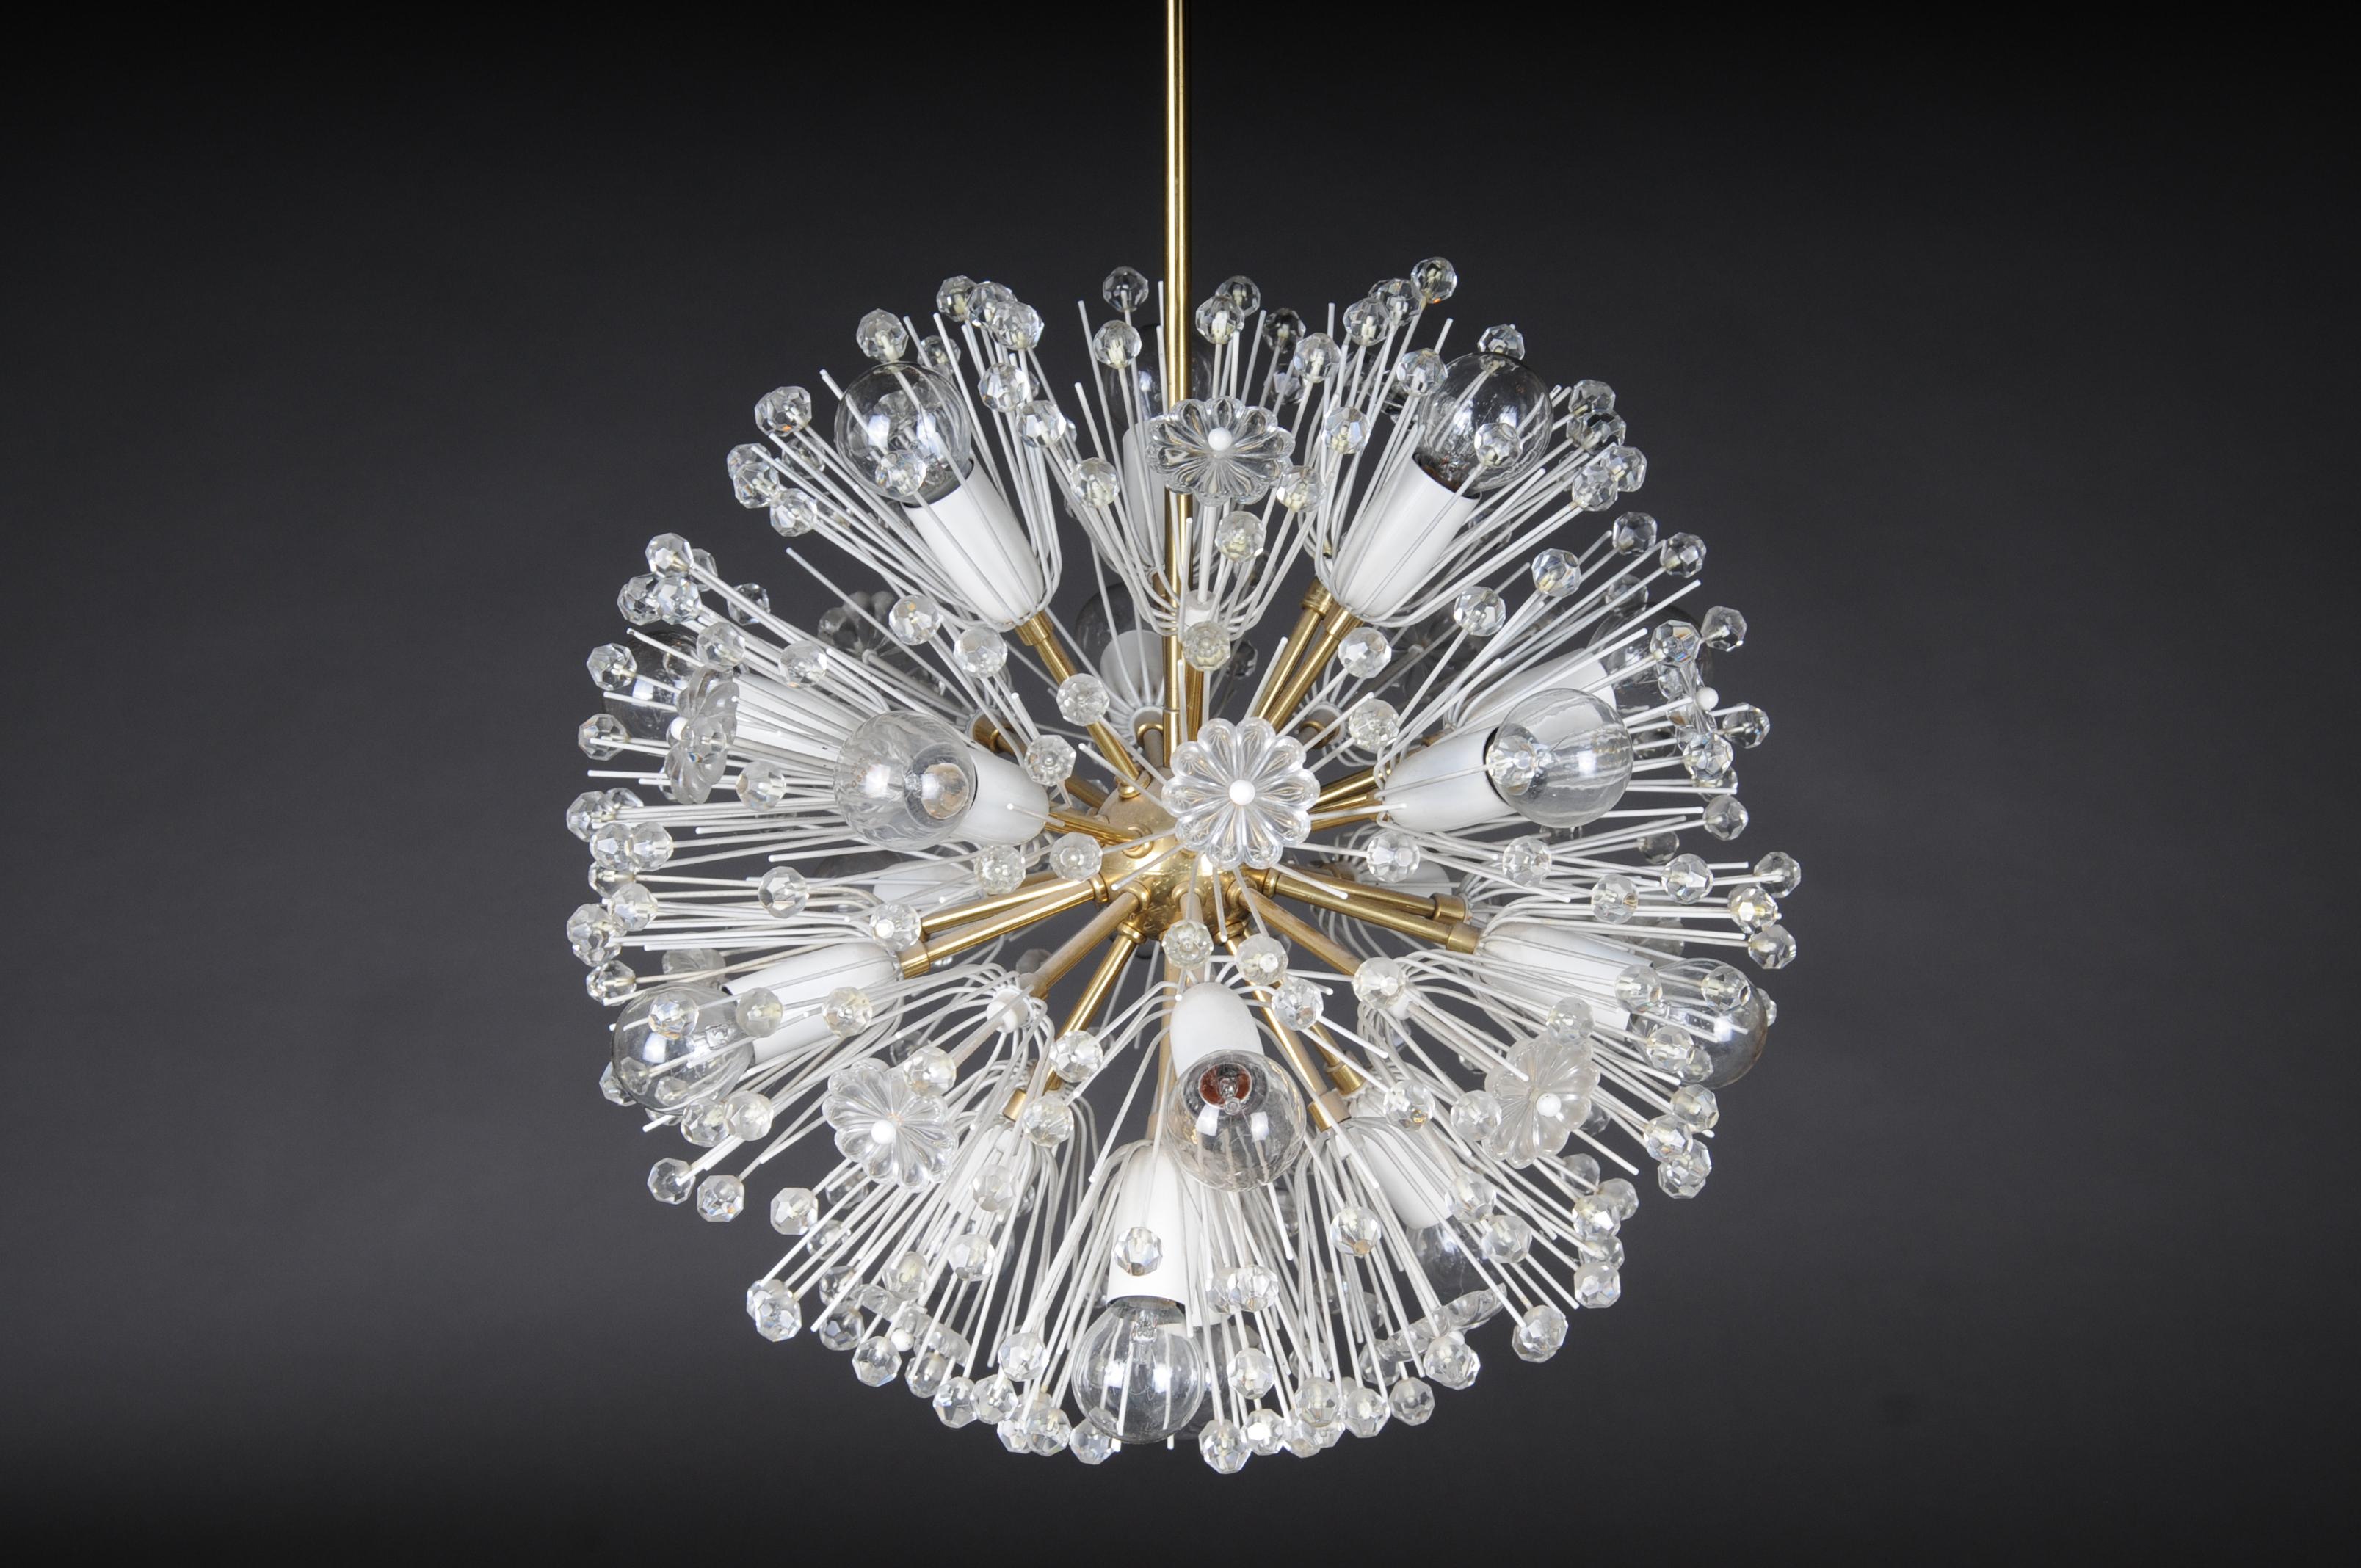 Emil Stejnar vintage chandelier / lamp Snowball 50s / 60s, medium

Round luminous body in brass gold / white, electrified.
The Viennese designer Emil Stejnar is known for his lighting designs of the Space Age era.

(F-117).